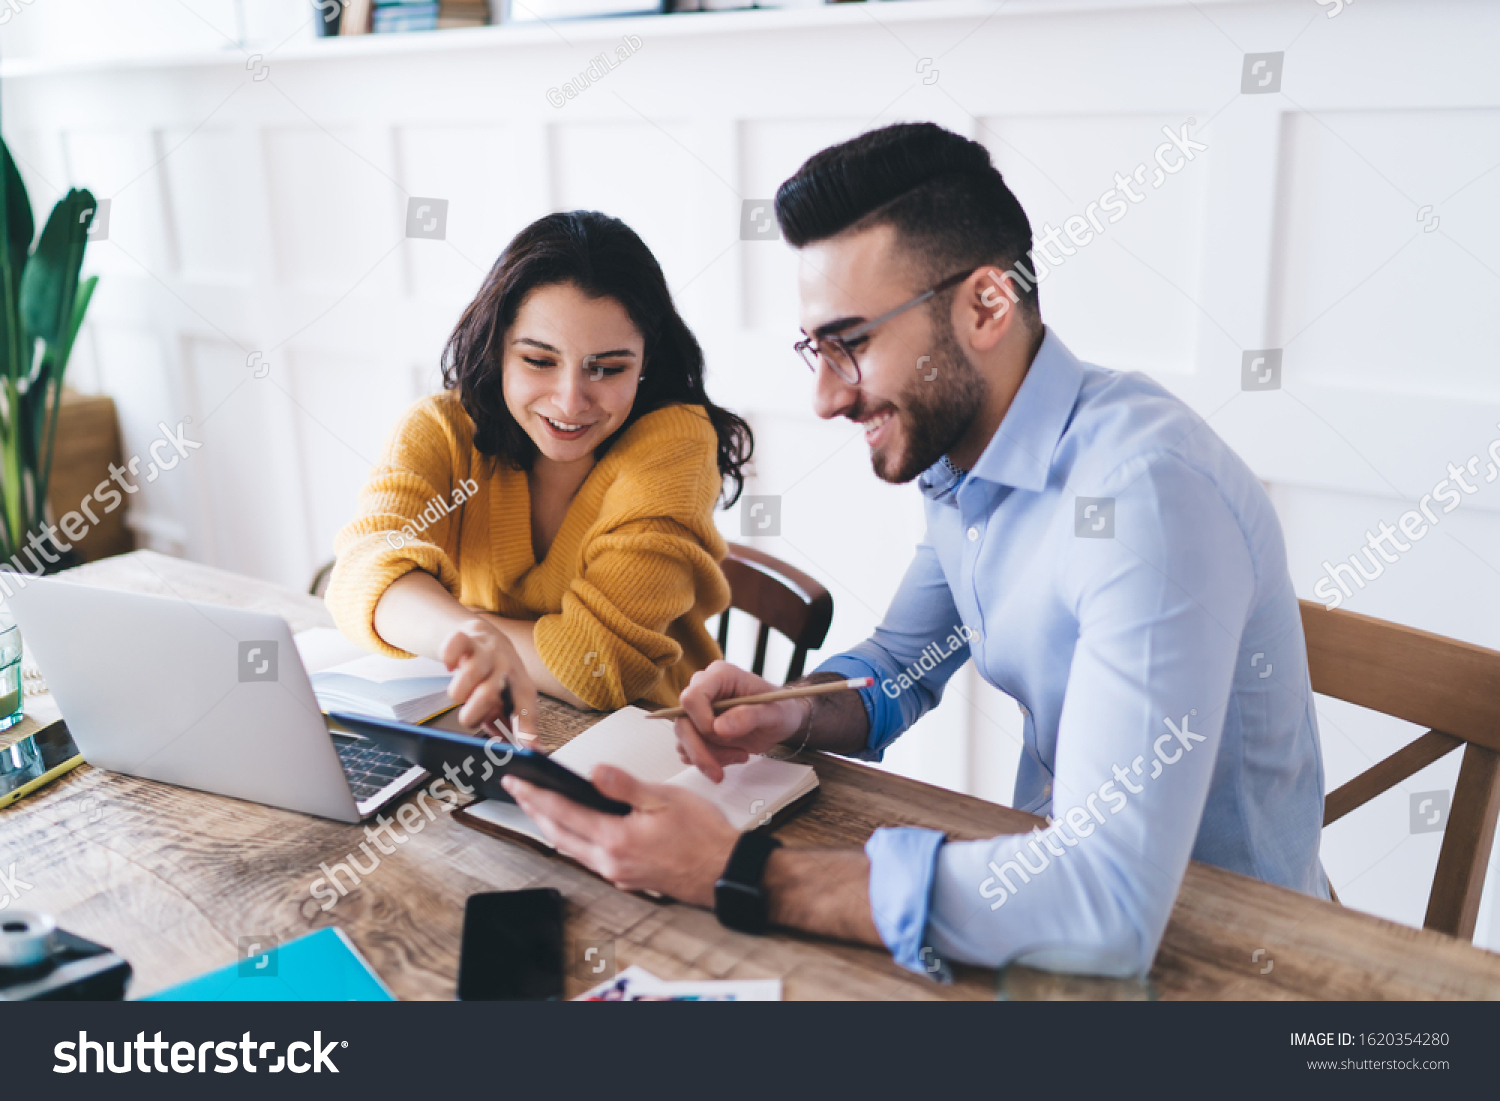 Glad couple wearing casual clothes writing notes in textbook while browsing laptop and tablet and sitting at table at home #1620354280